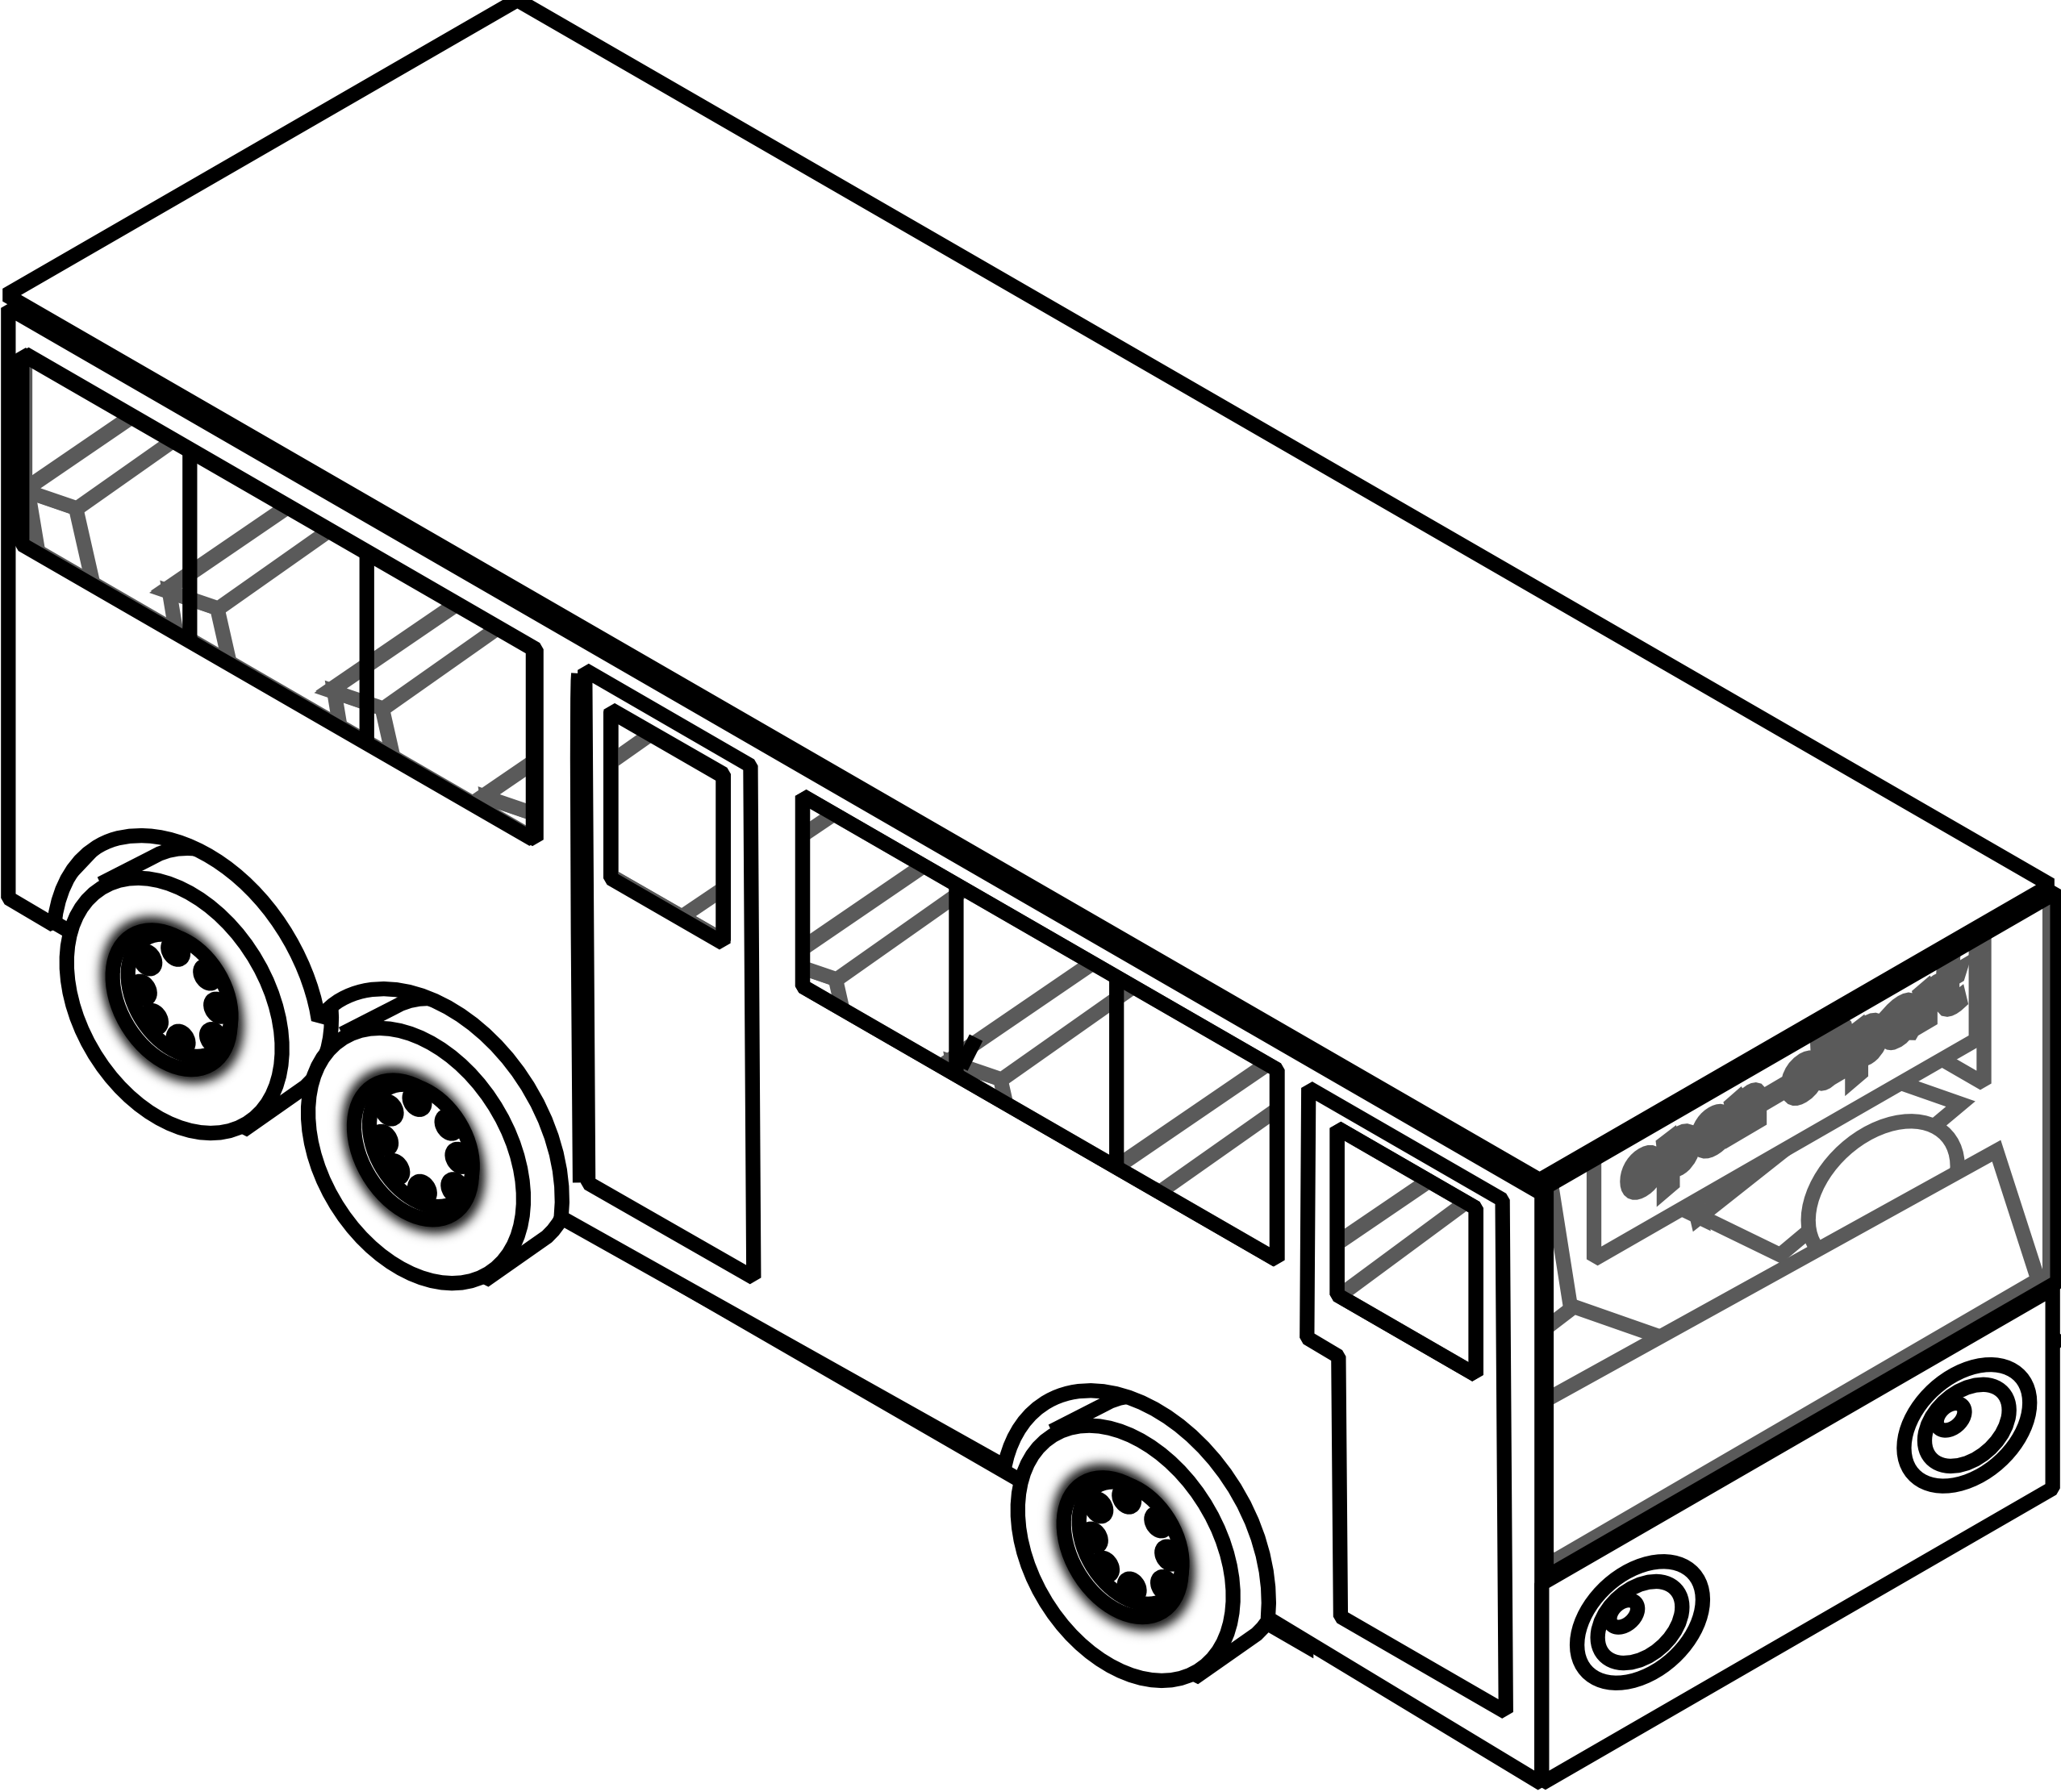 Best Bus Clipart Black And White